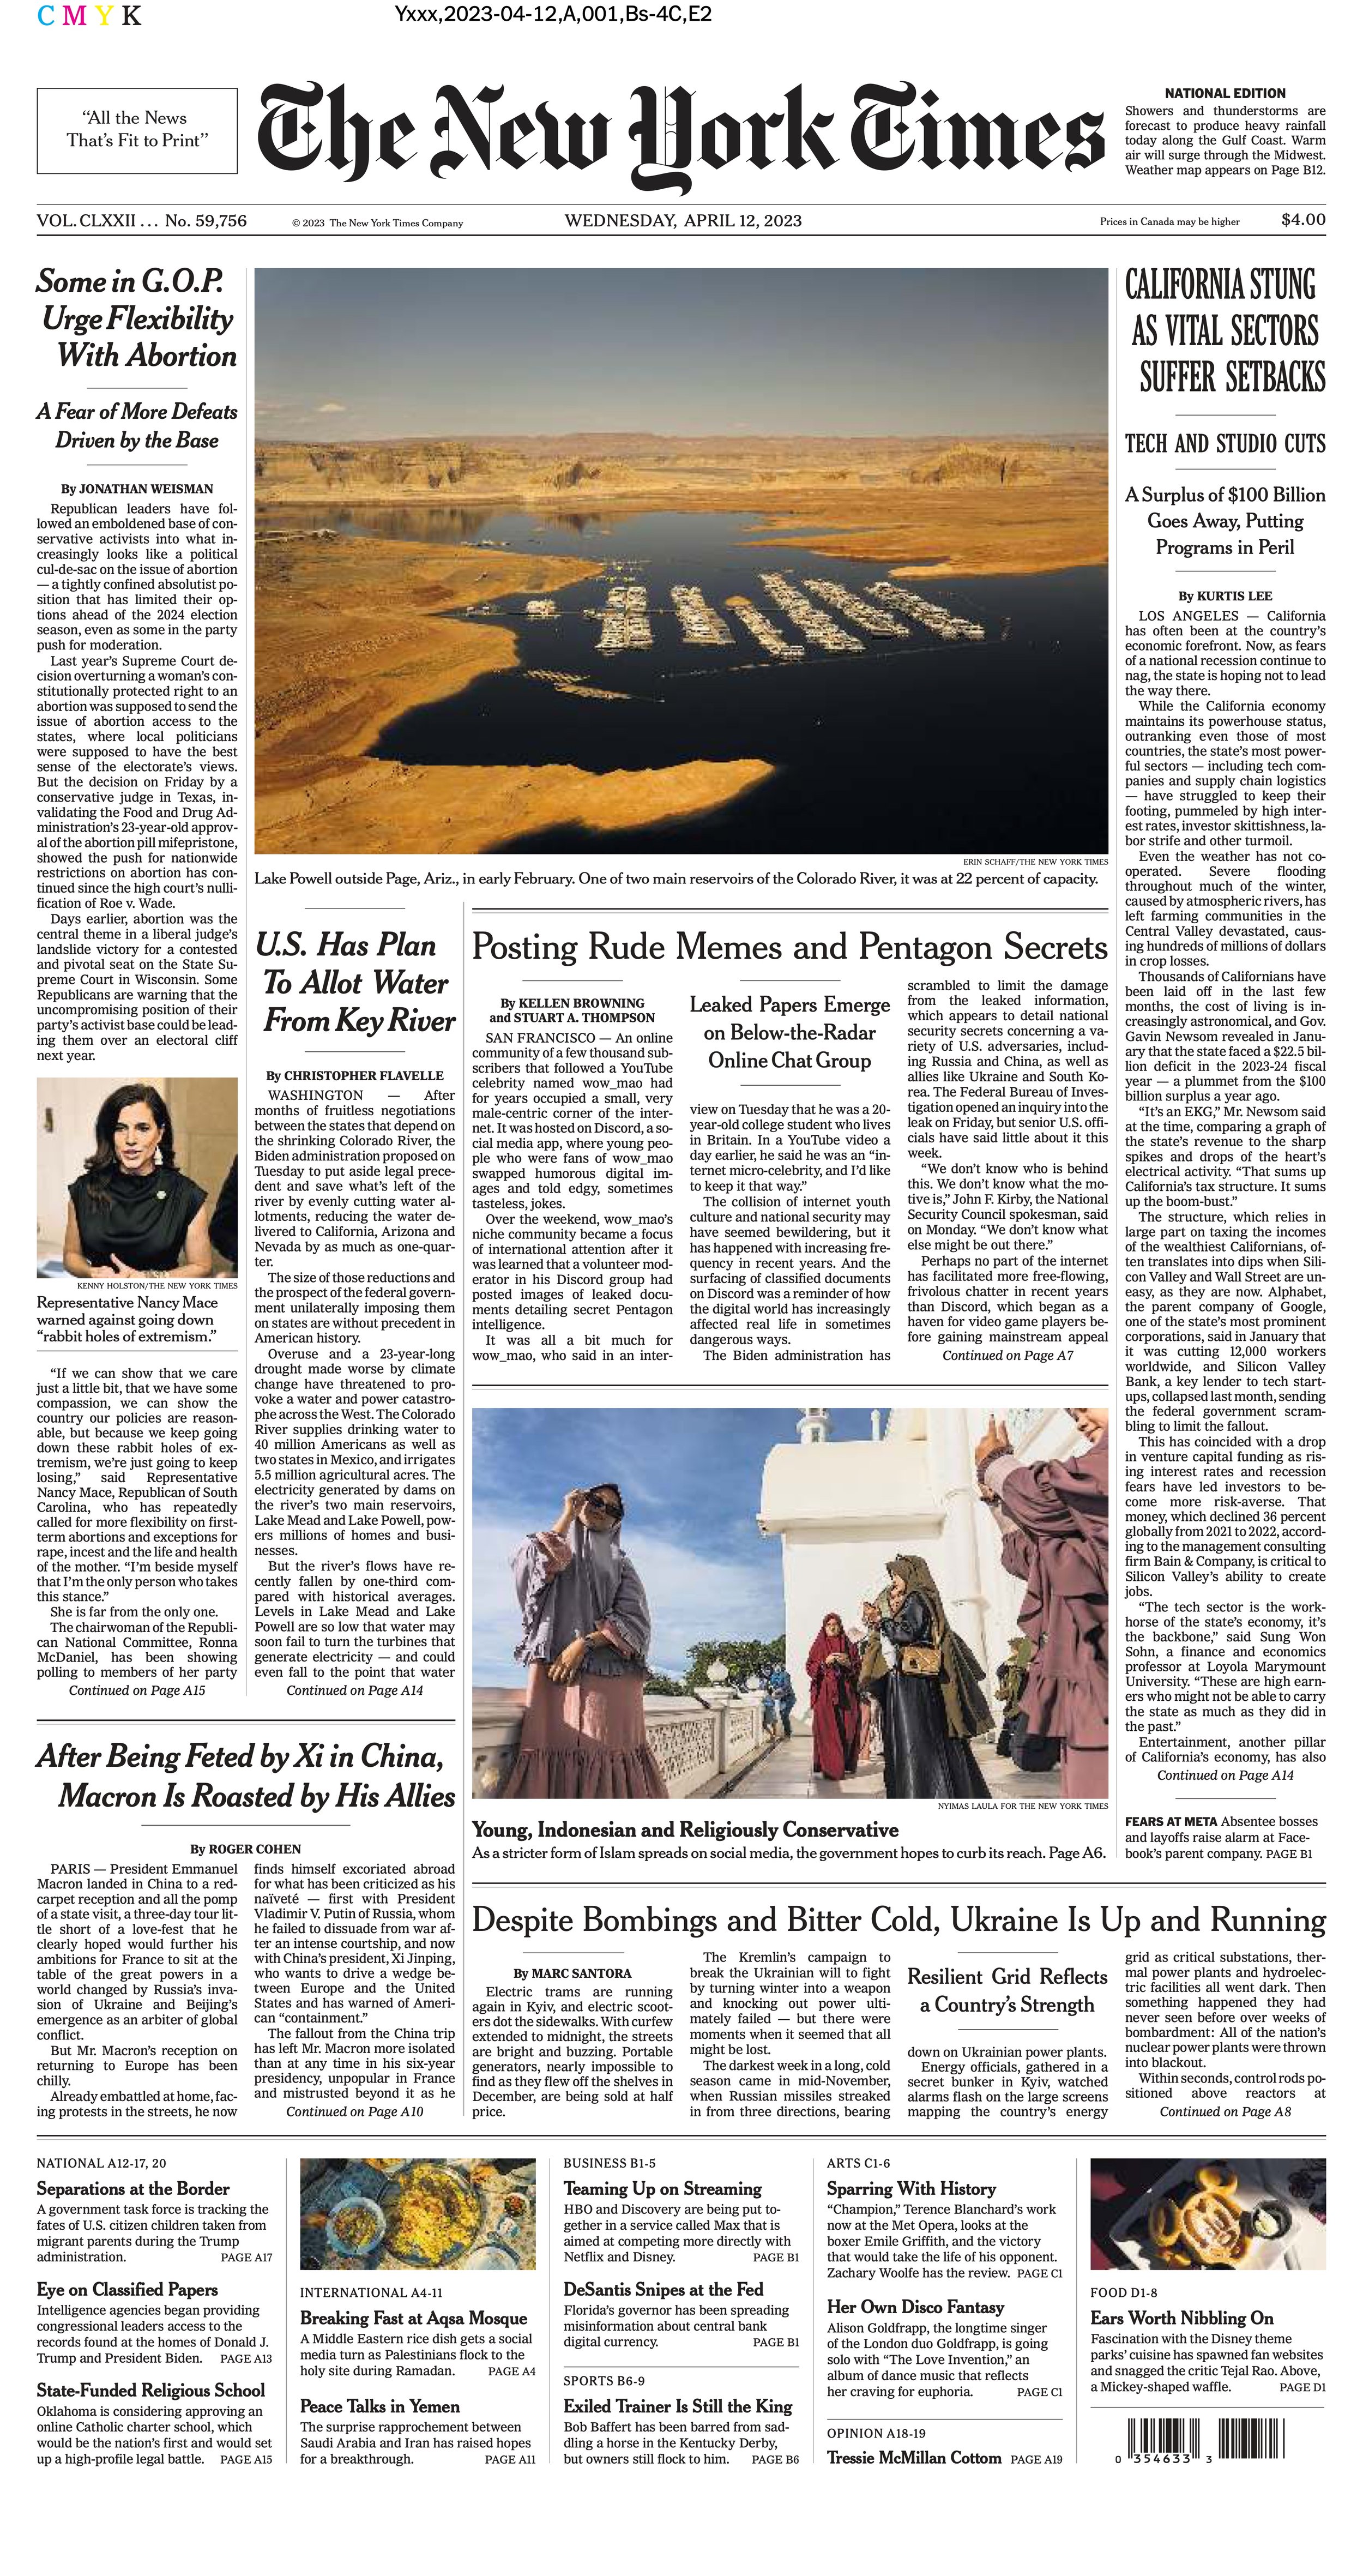 The New York Times Front Page, April 12, 2023.